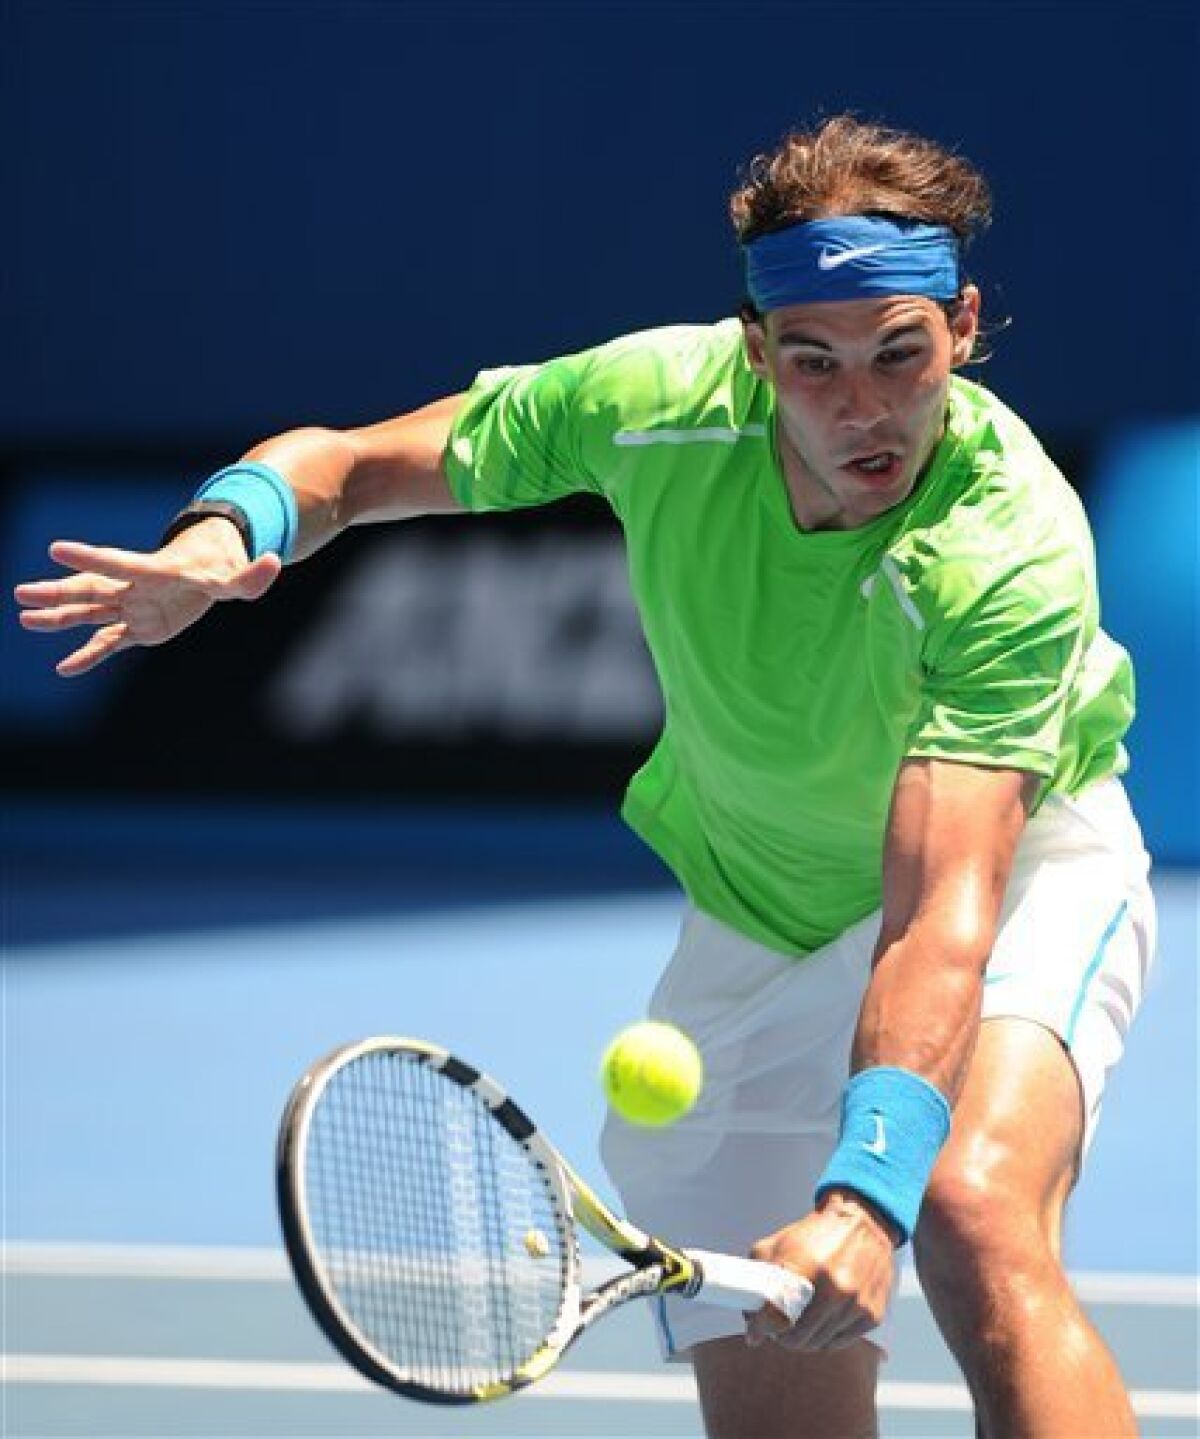 Spain's Rafael Nadal makes a backhand return to Germany's Tommy Haas during their second round match at the Australian Open tennis championship, in Melbourne, Australia, Wednesday, Jan. 18, 2012. (AP Photo/Andrew Brownbill)